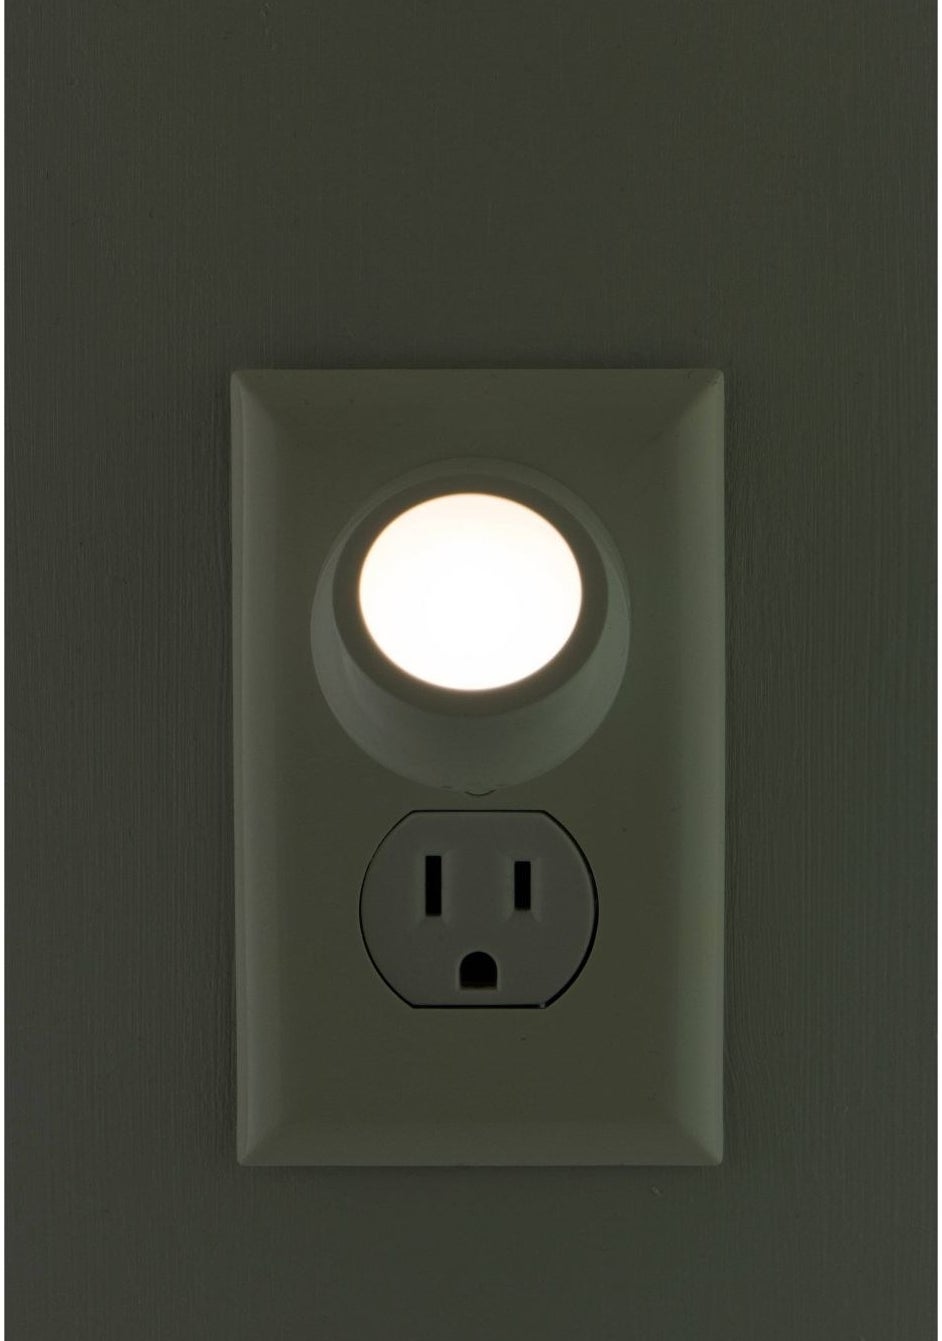 The nightlight, which plugs directly into an outlet